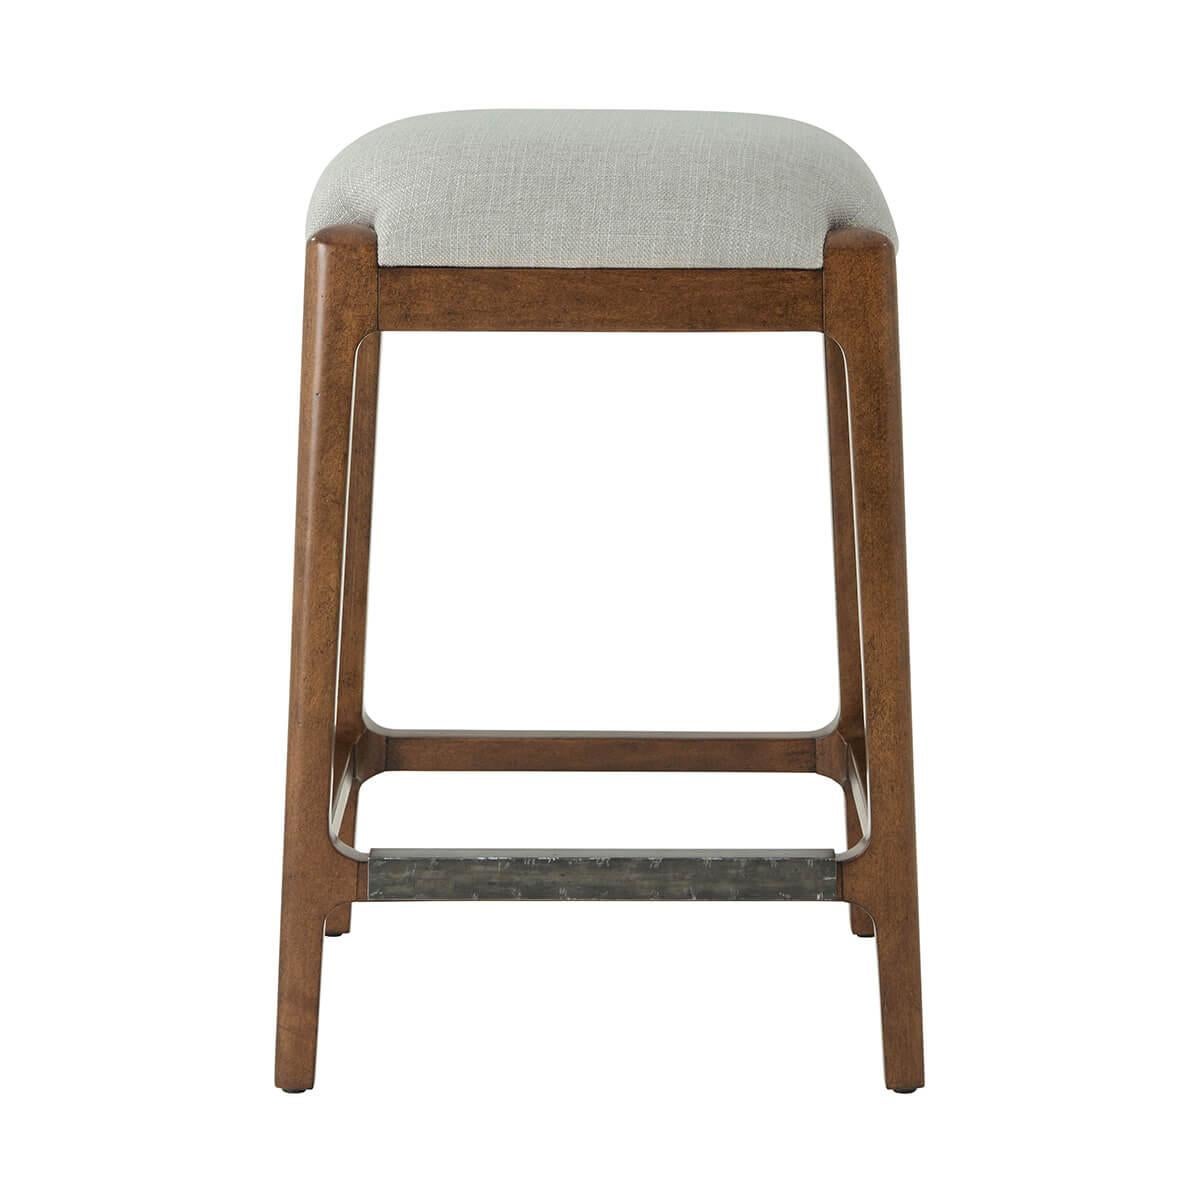 with an upholstered cushion seat covered in performance fabric, on splayed tapering legs joined by a stretcher in a slightly distressed warm color finish.

Dimensions: 17.75